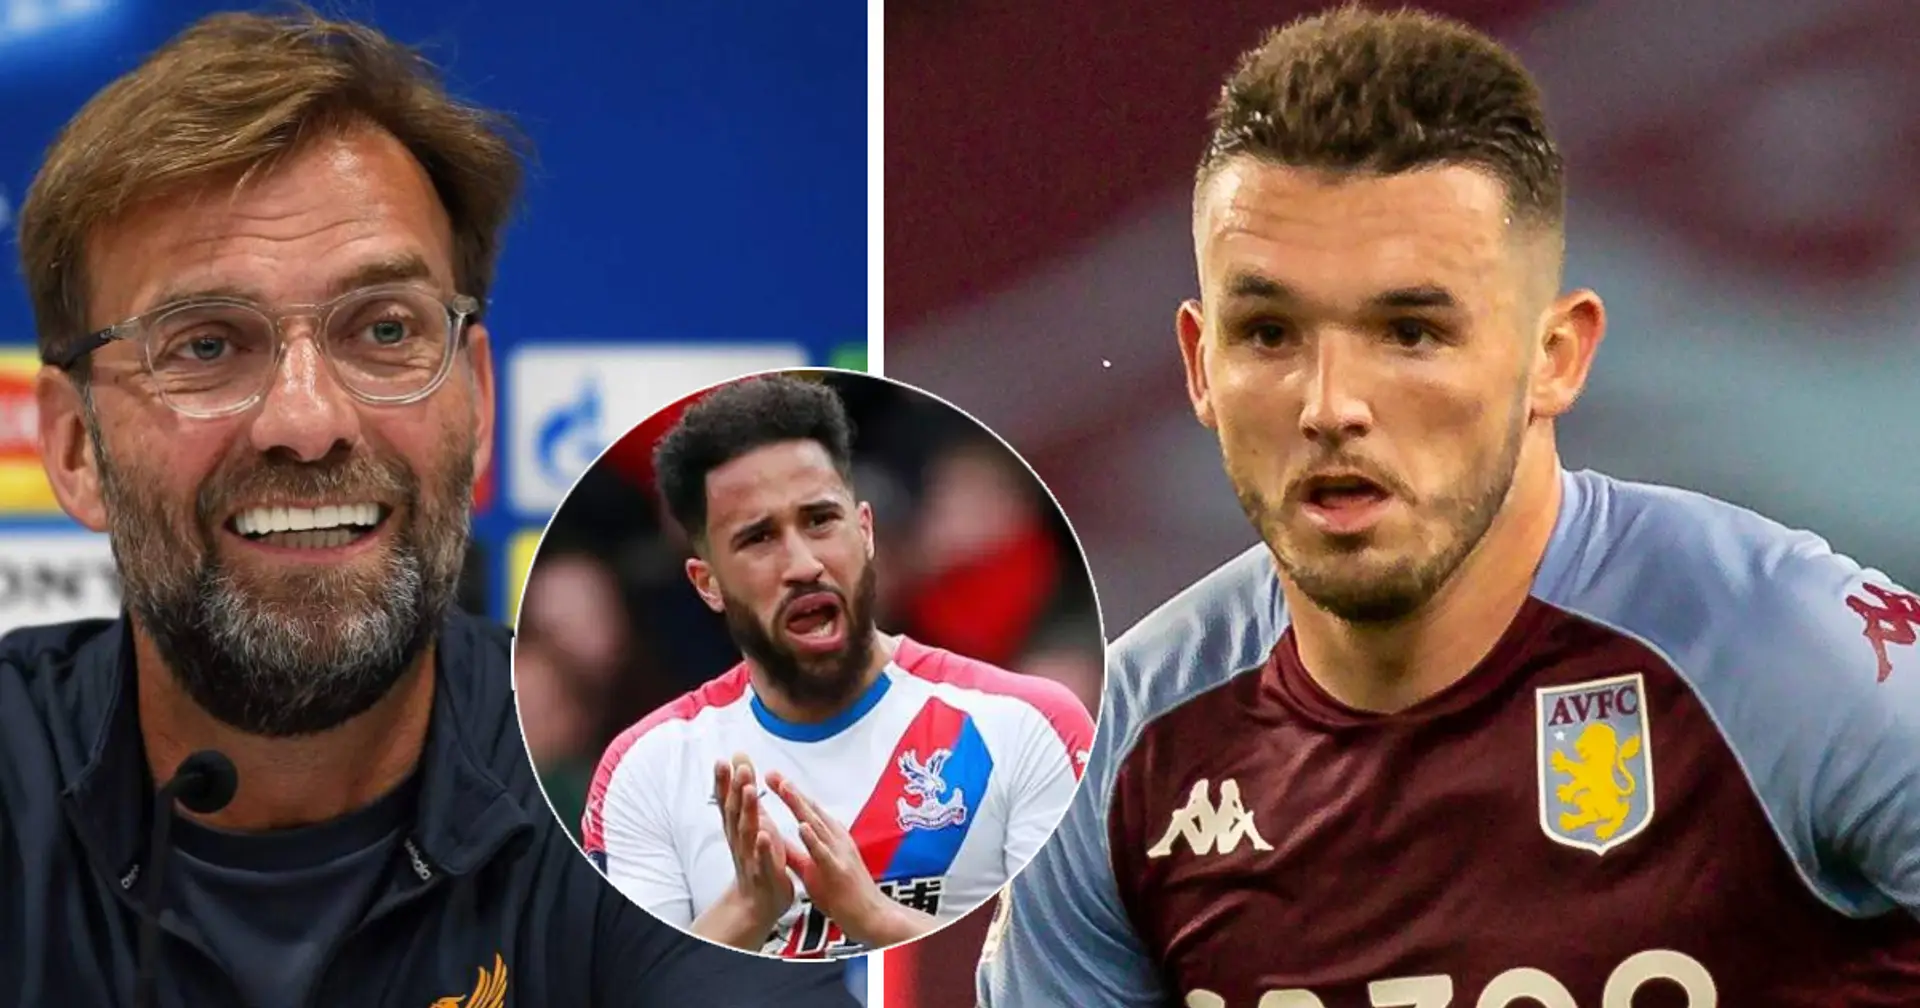 'He would be perfect': Palace player Andros Townsend backs McGinn to slot straight into Liverpool if signed